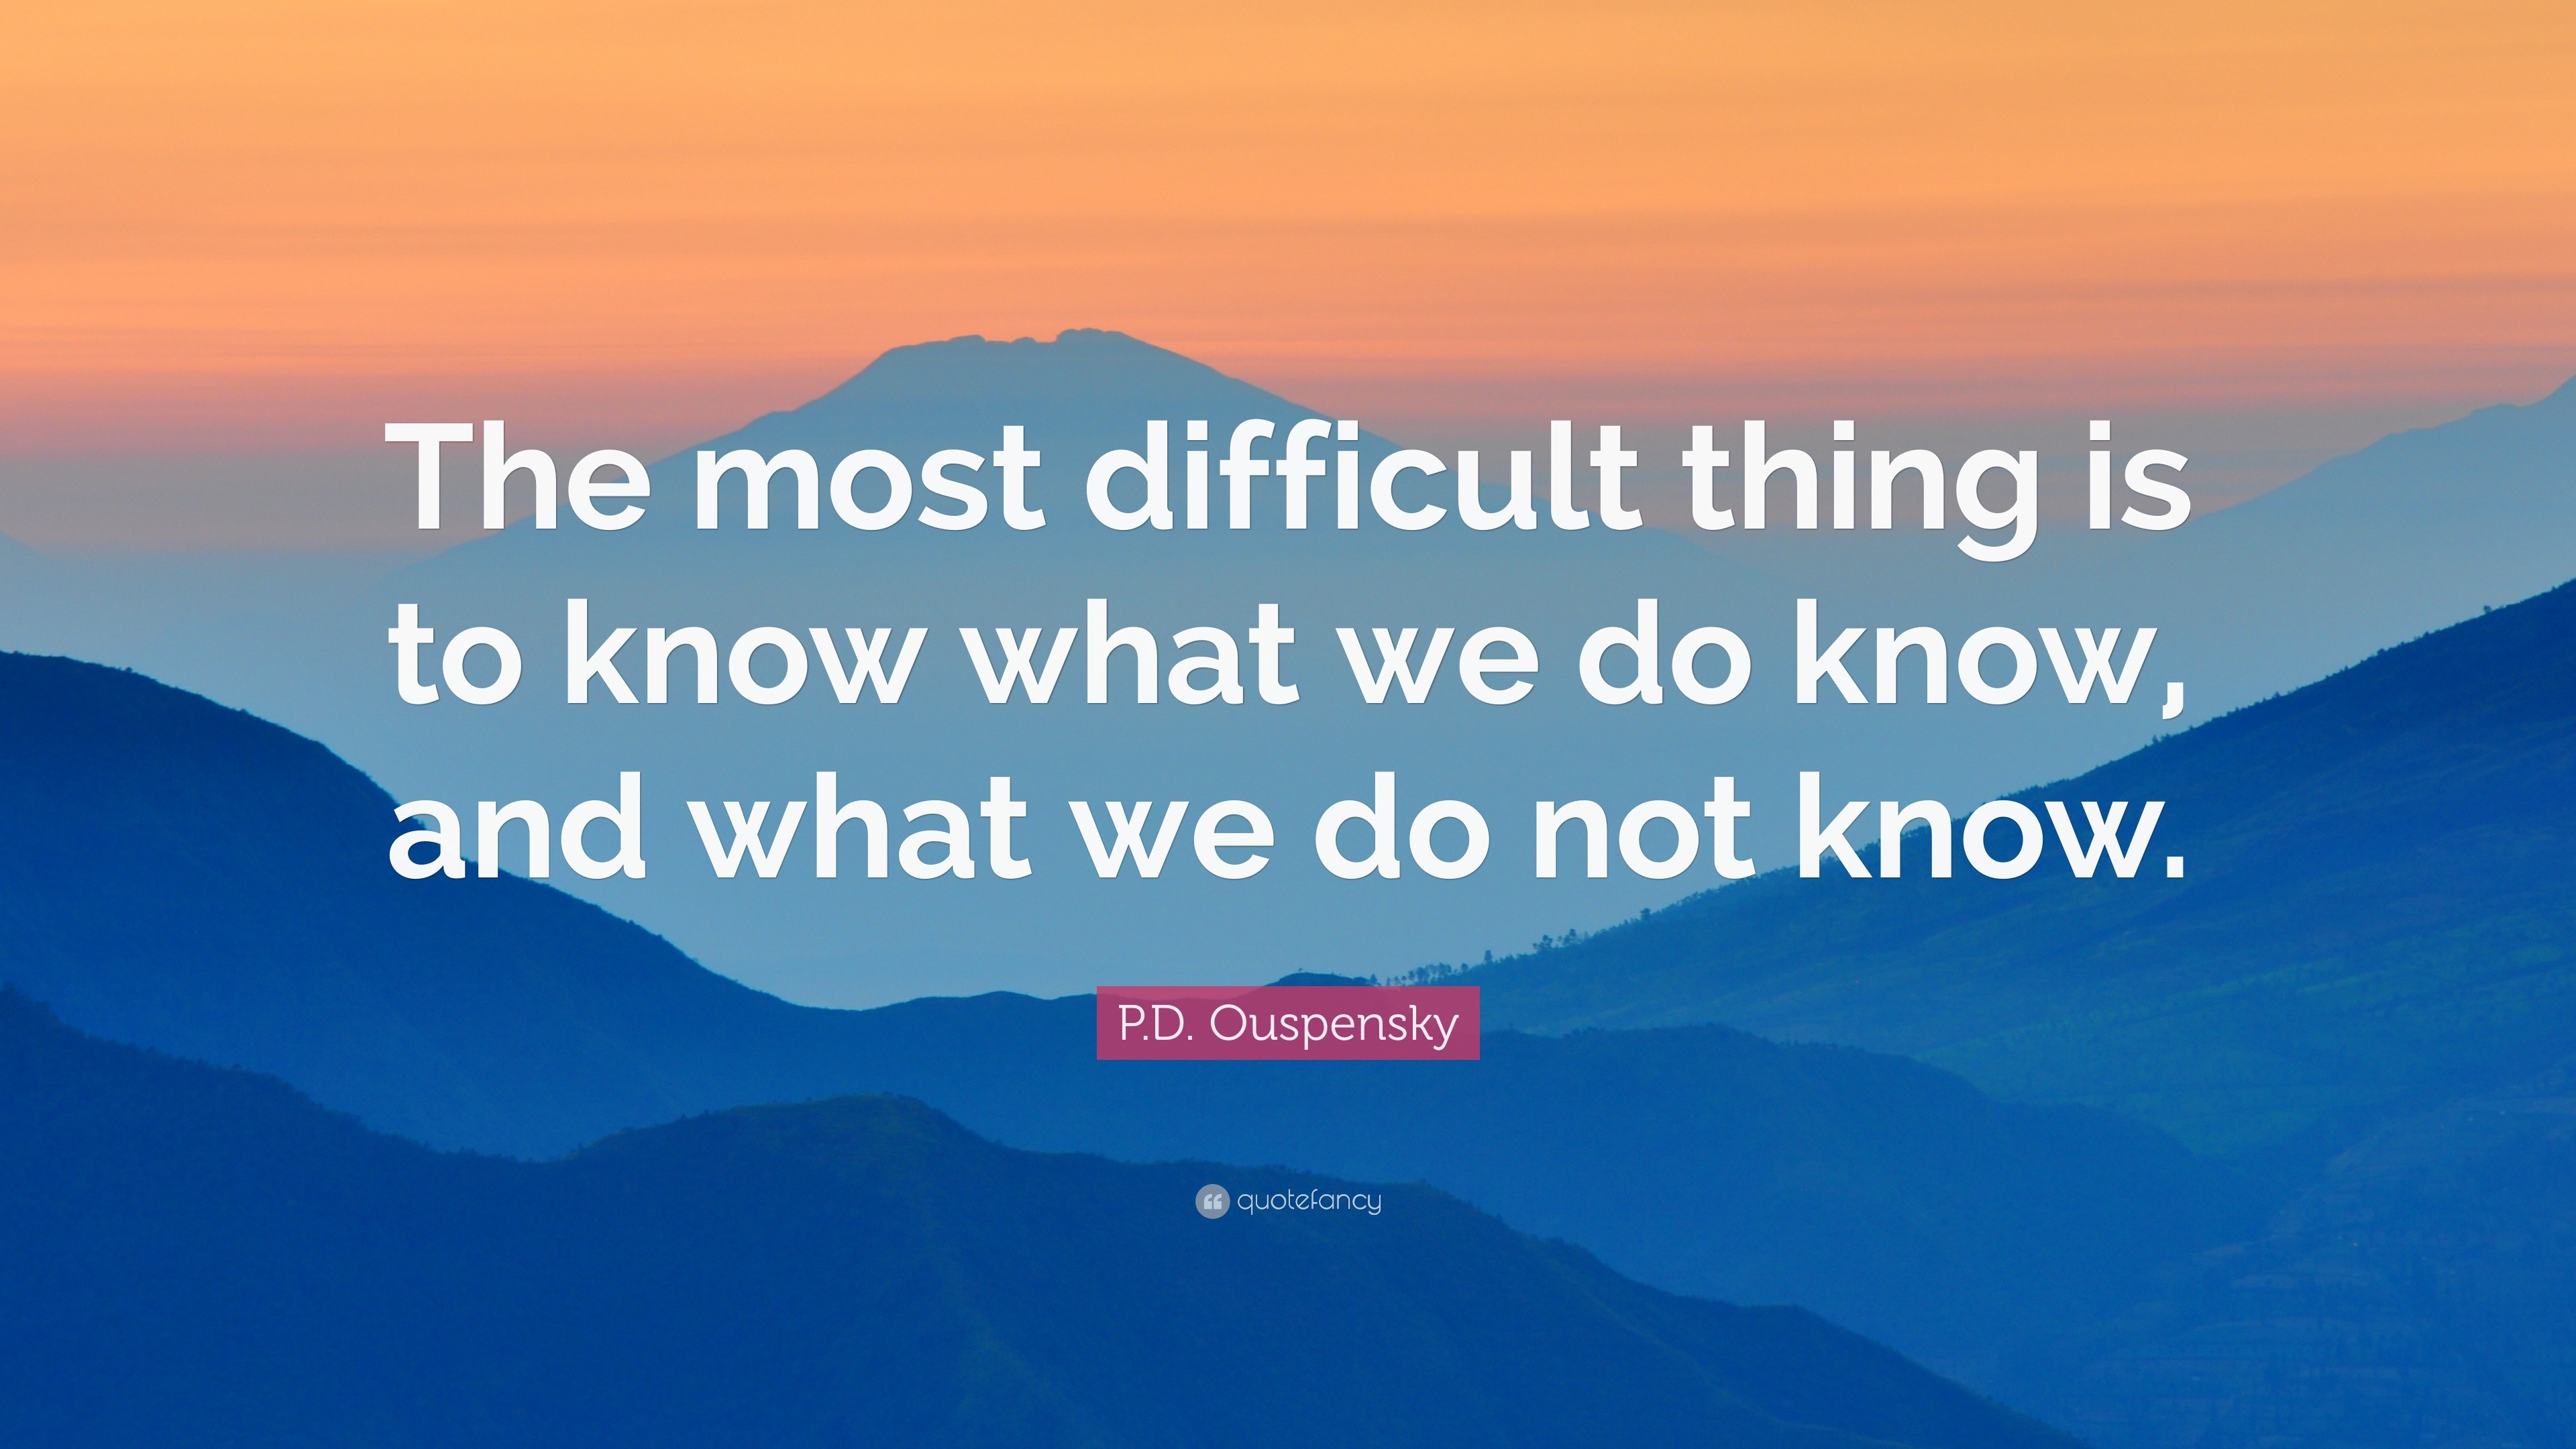 P.D. Ouspensky Quote: “The most difficult thing is to know what we do ...